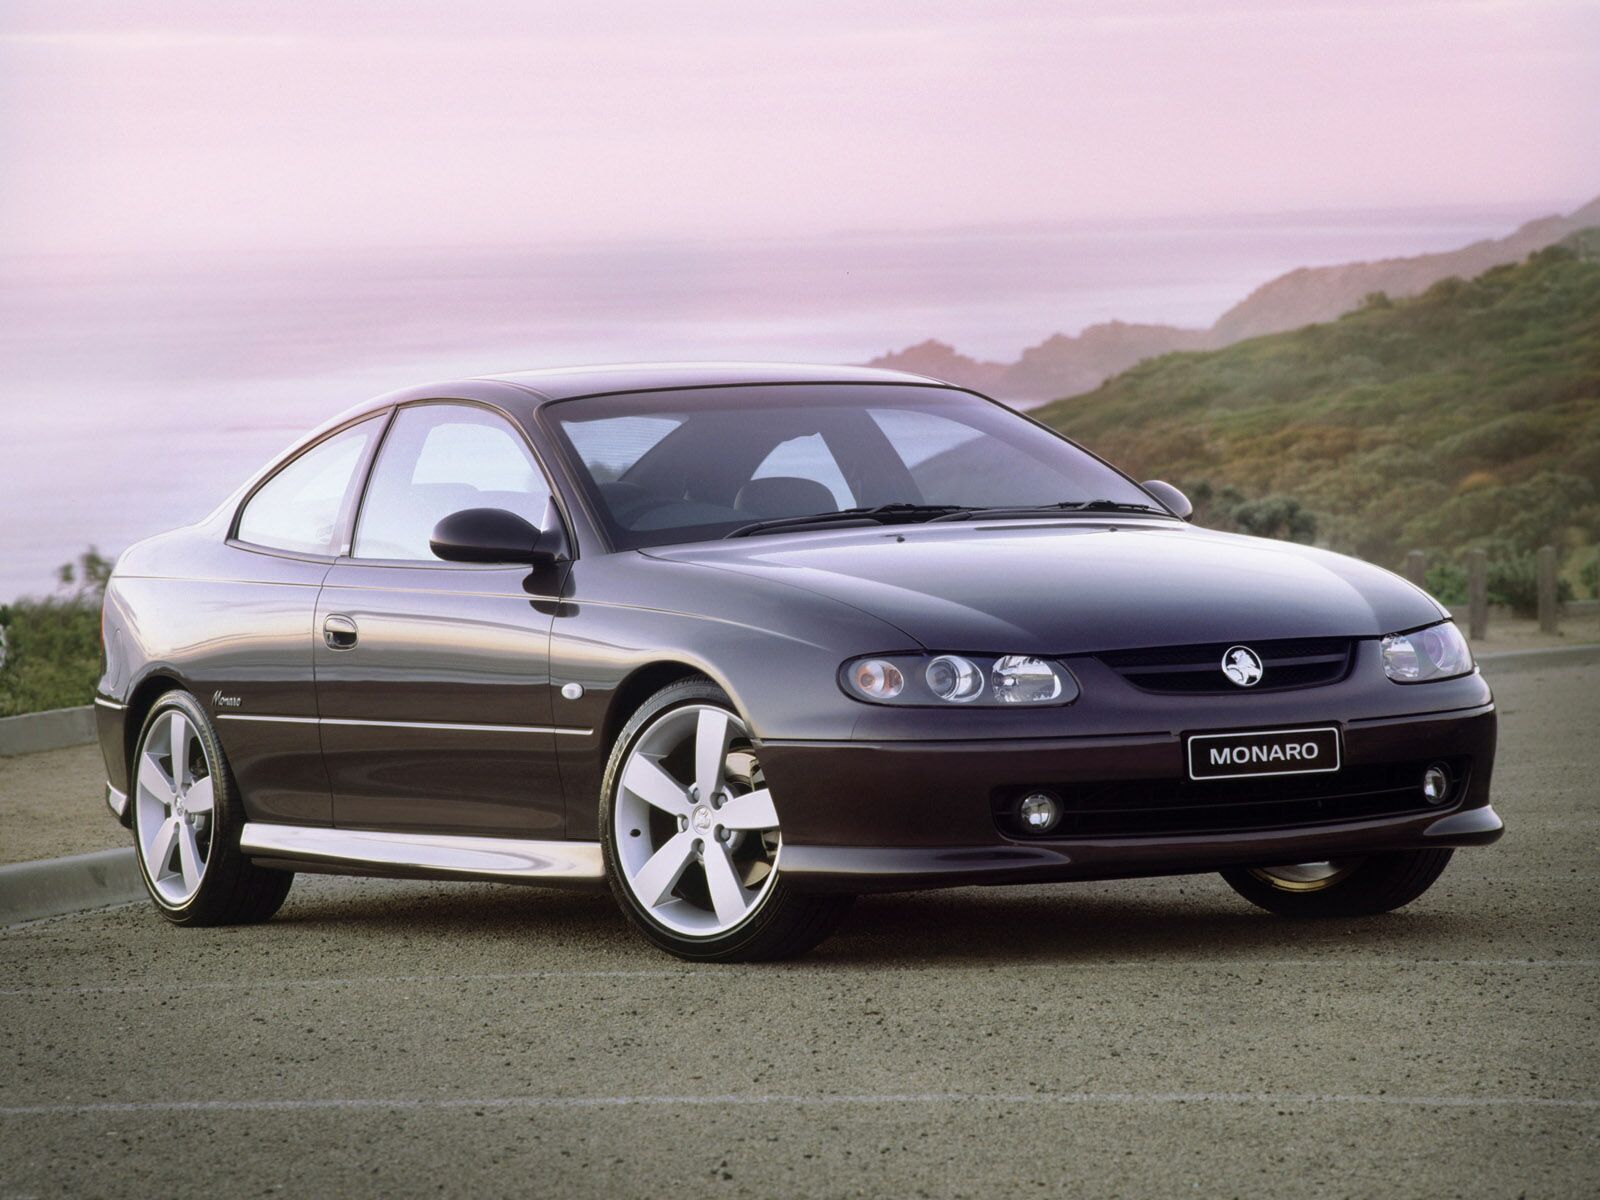 Holden monaro (566 comments) Views 7694 Rating 62